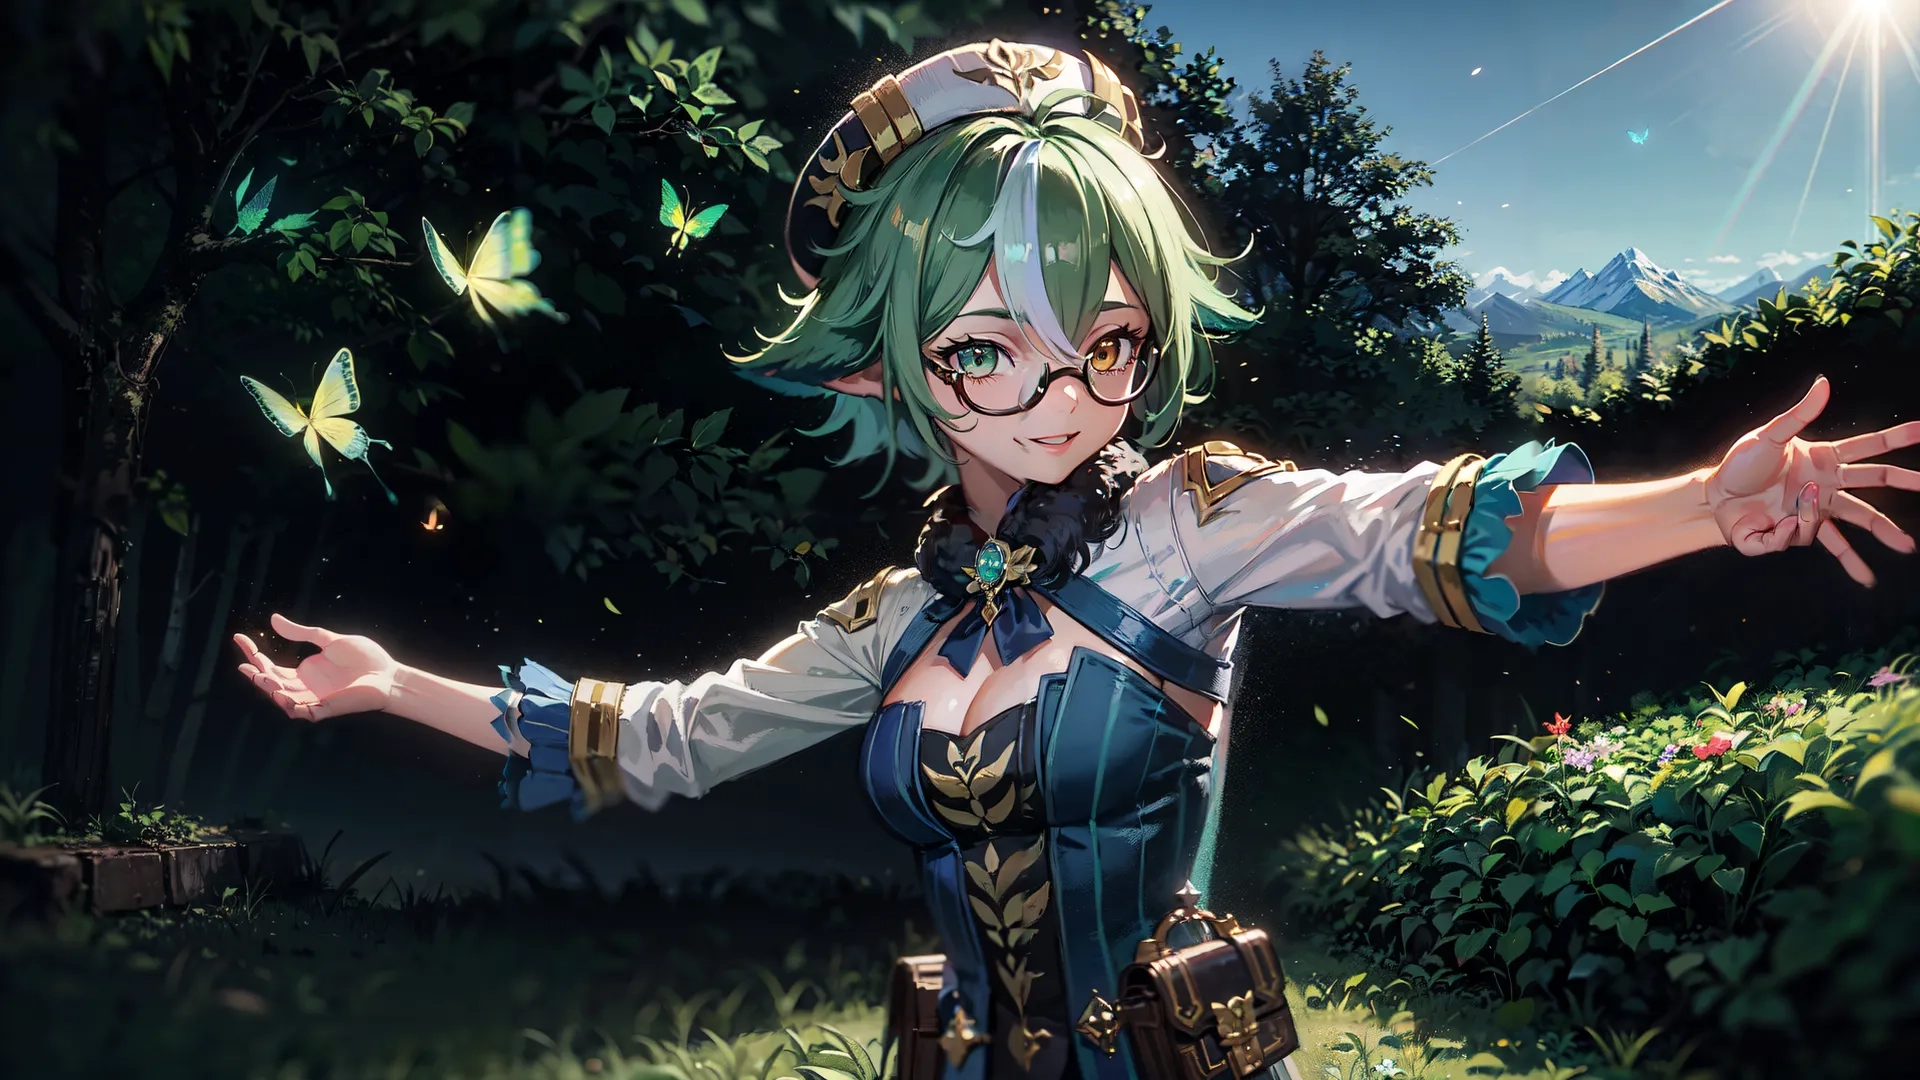 an anime character, dressed as elf girl with colorful hair and eyeglasses, posing in woods while catching butterflies on trees and grass
